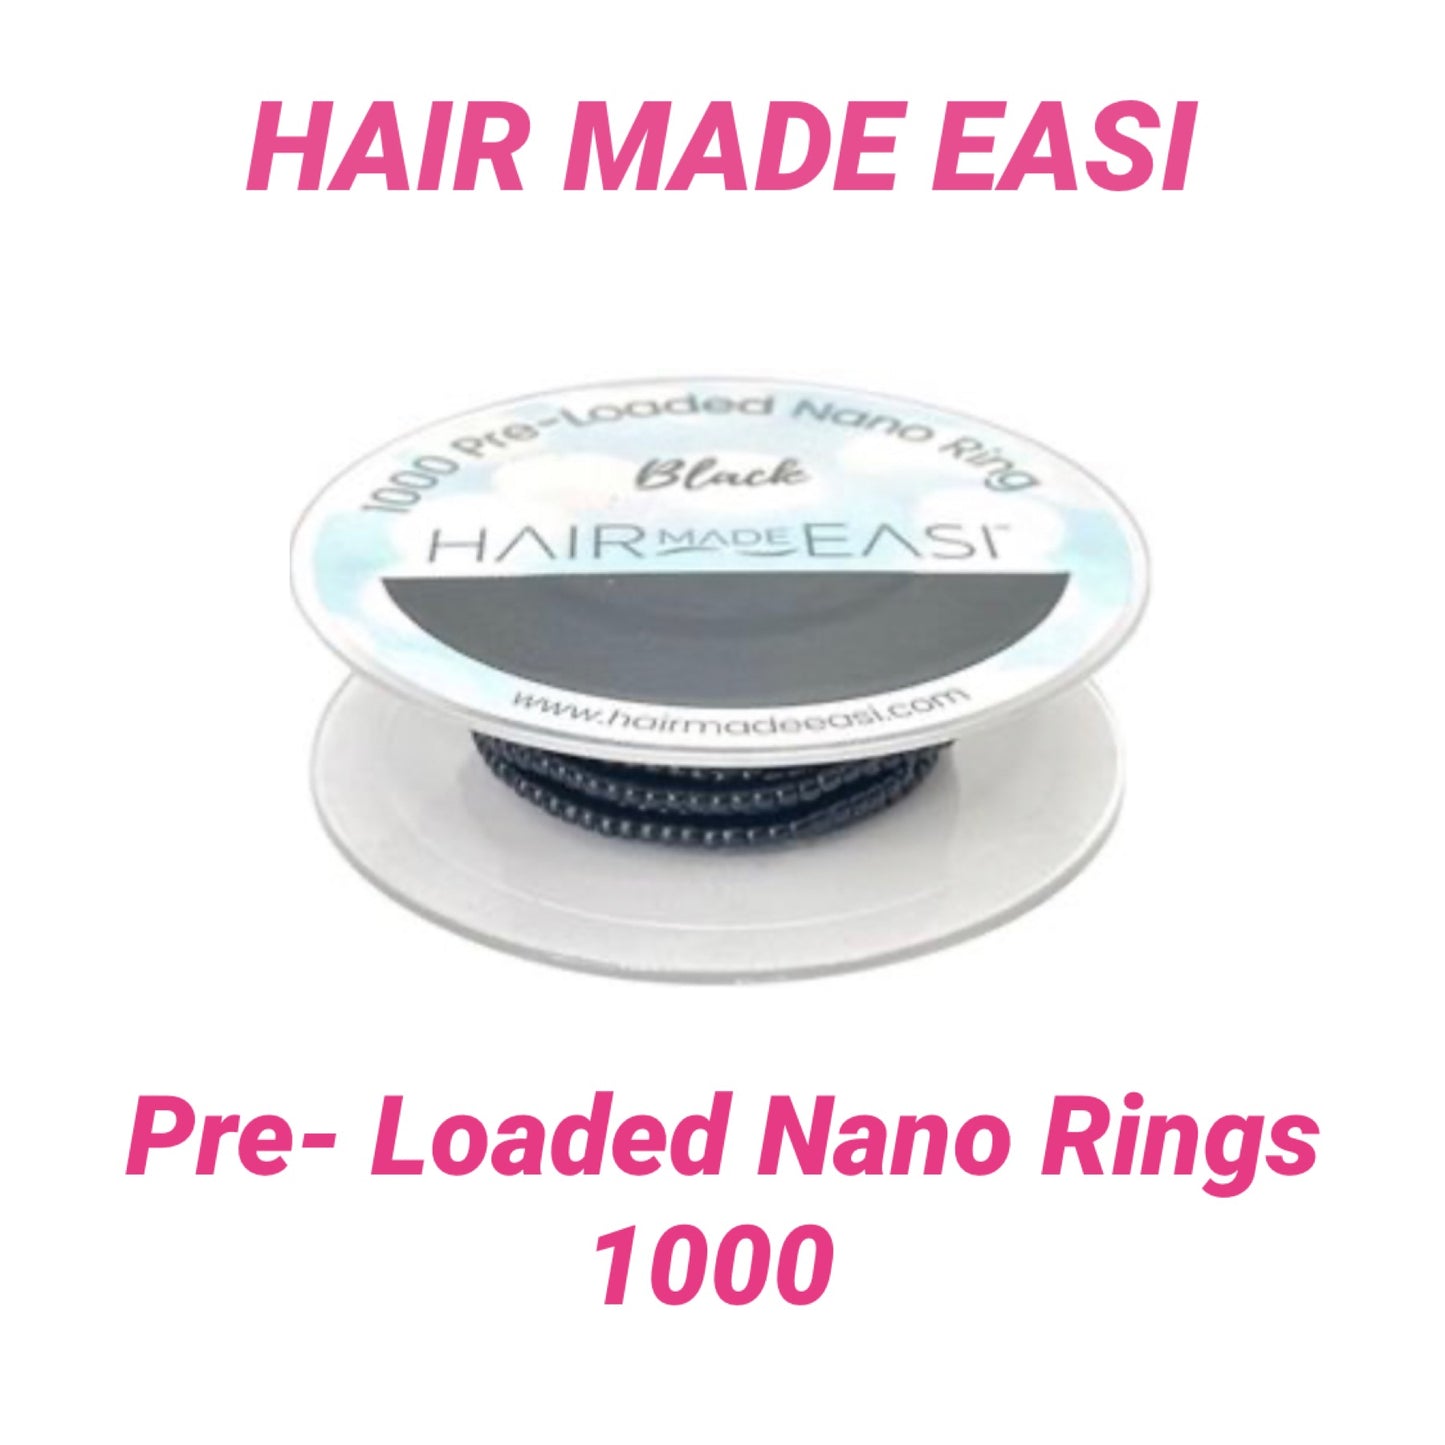 Hair Made Easi 1000 Sillicon Lined Pre Loaded Nano Rings 6 colours